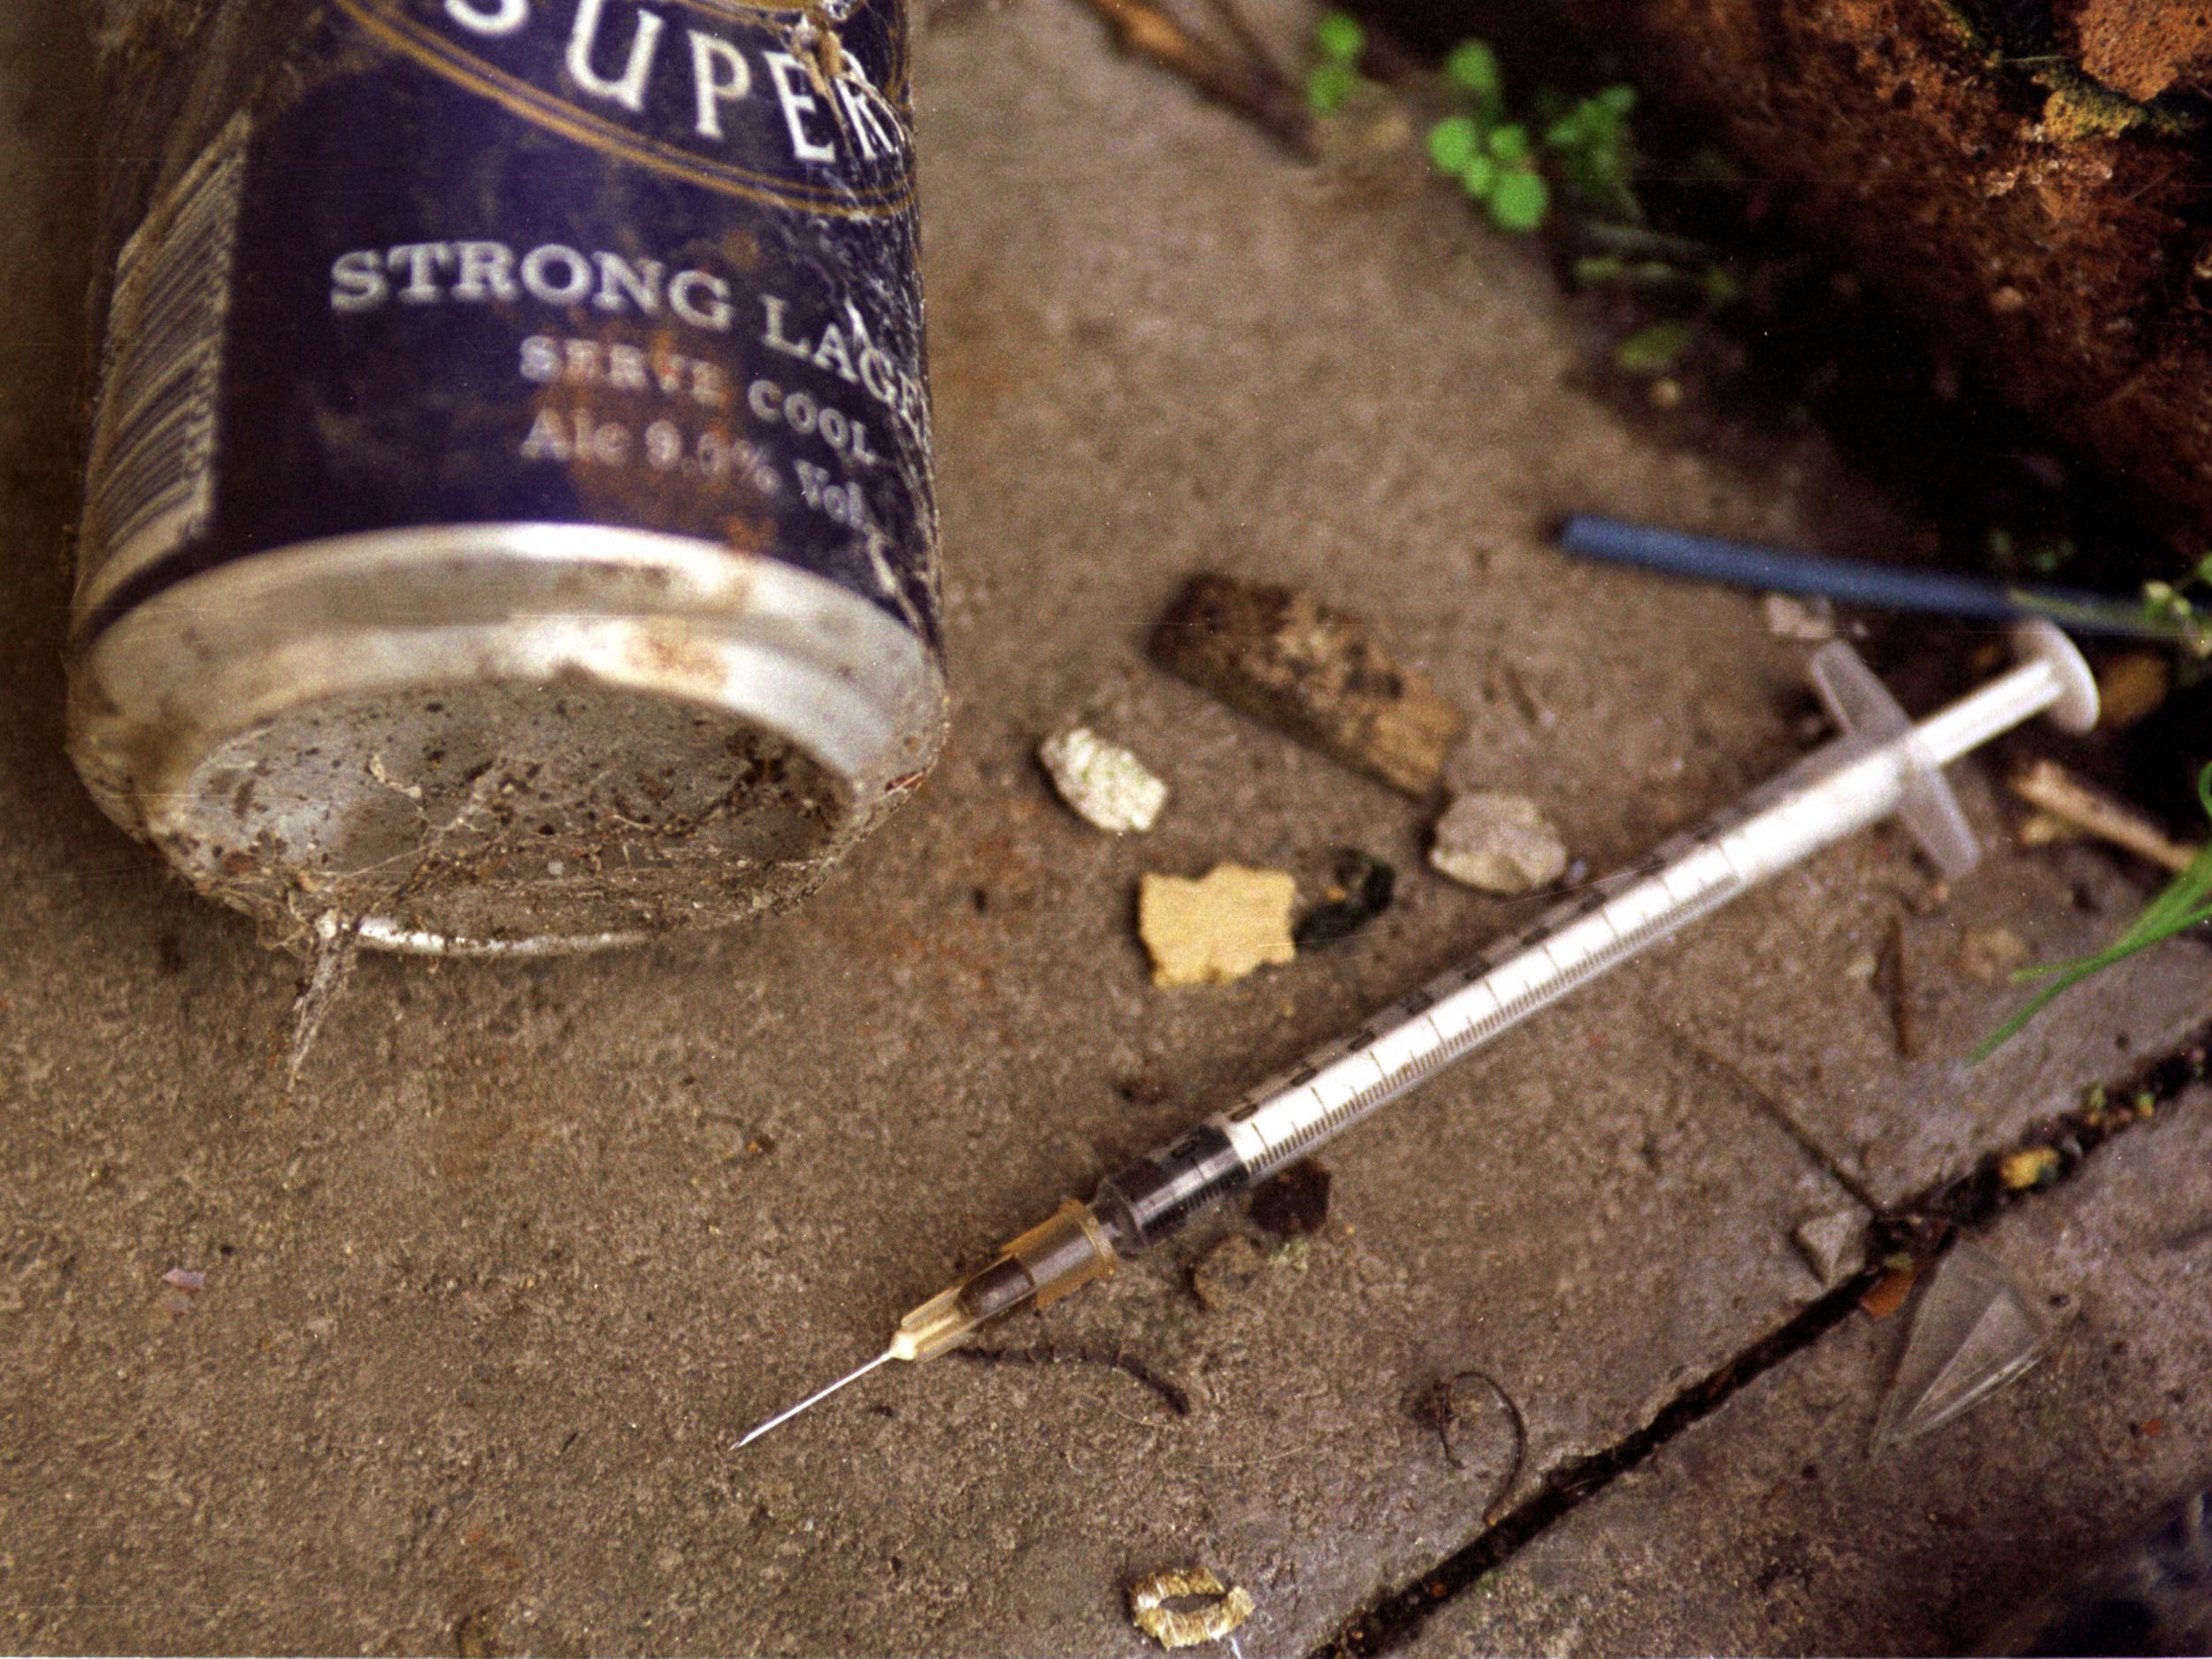 Needle exchange services were introduced in the 1980s amid fears of HIV spreading among drug users